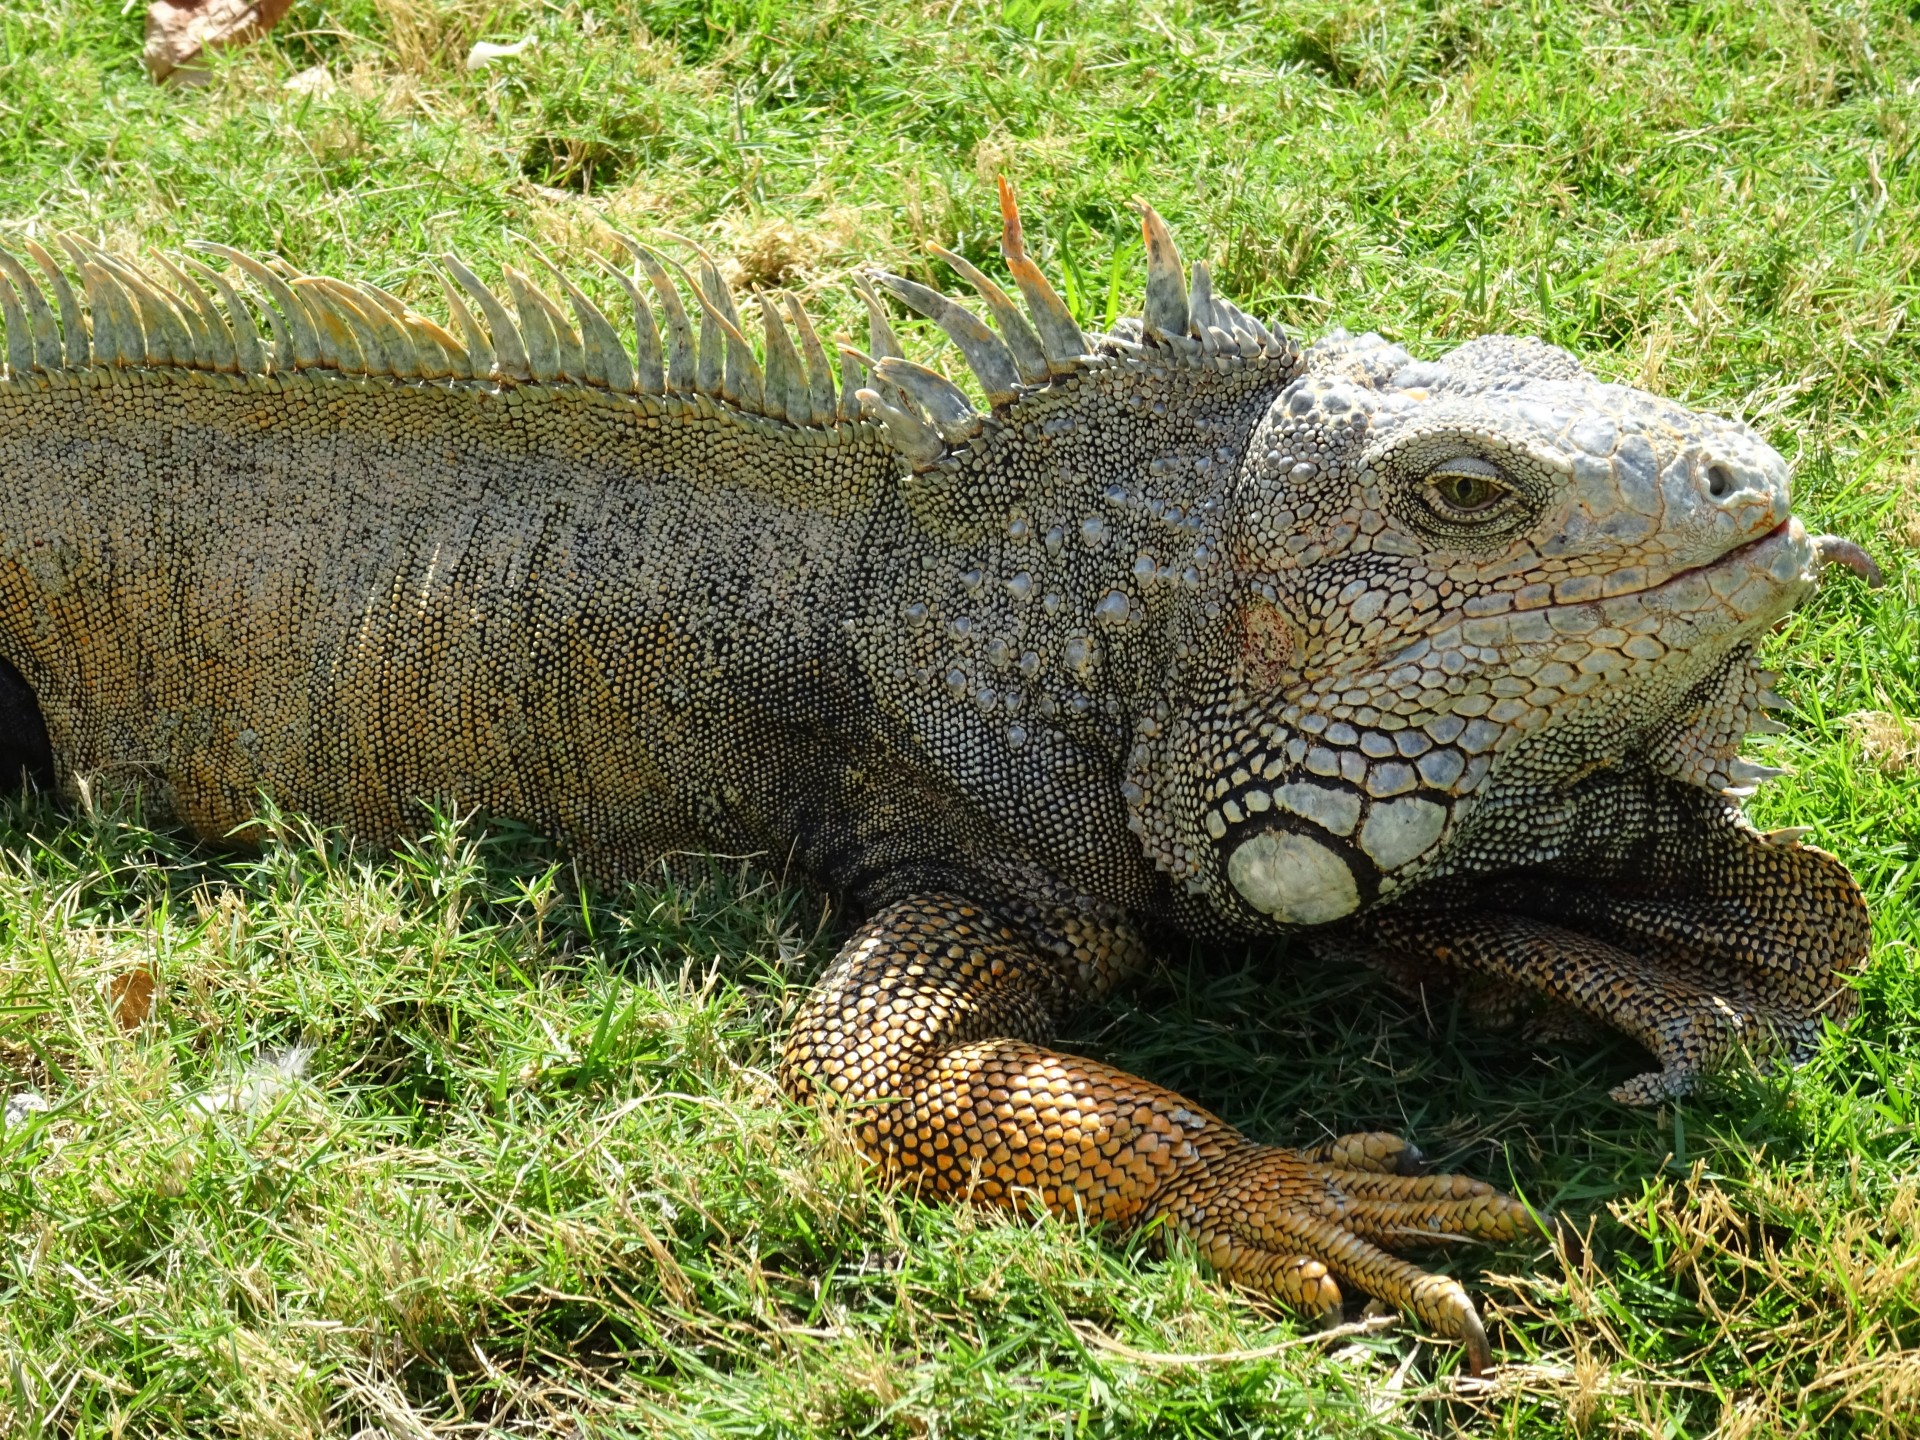 Here we are! An iguana. Very regal I think.